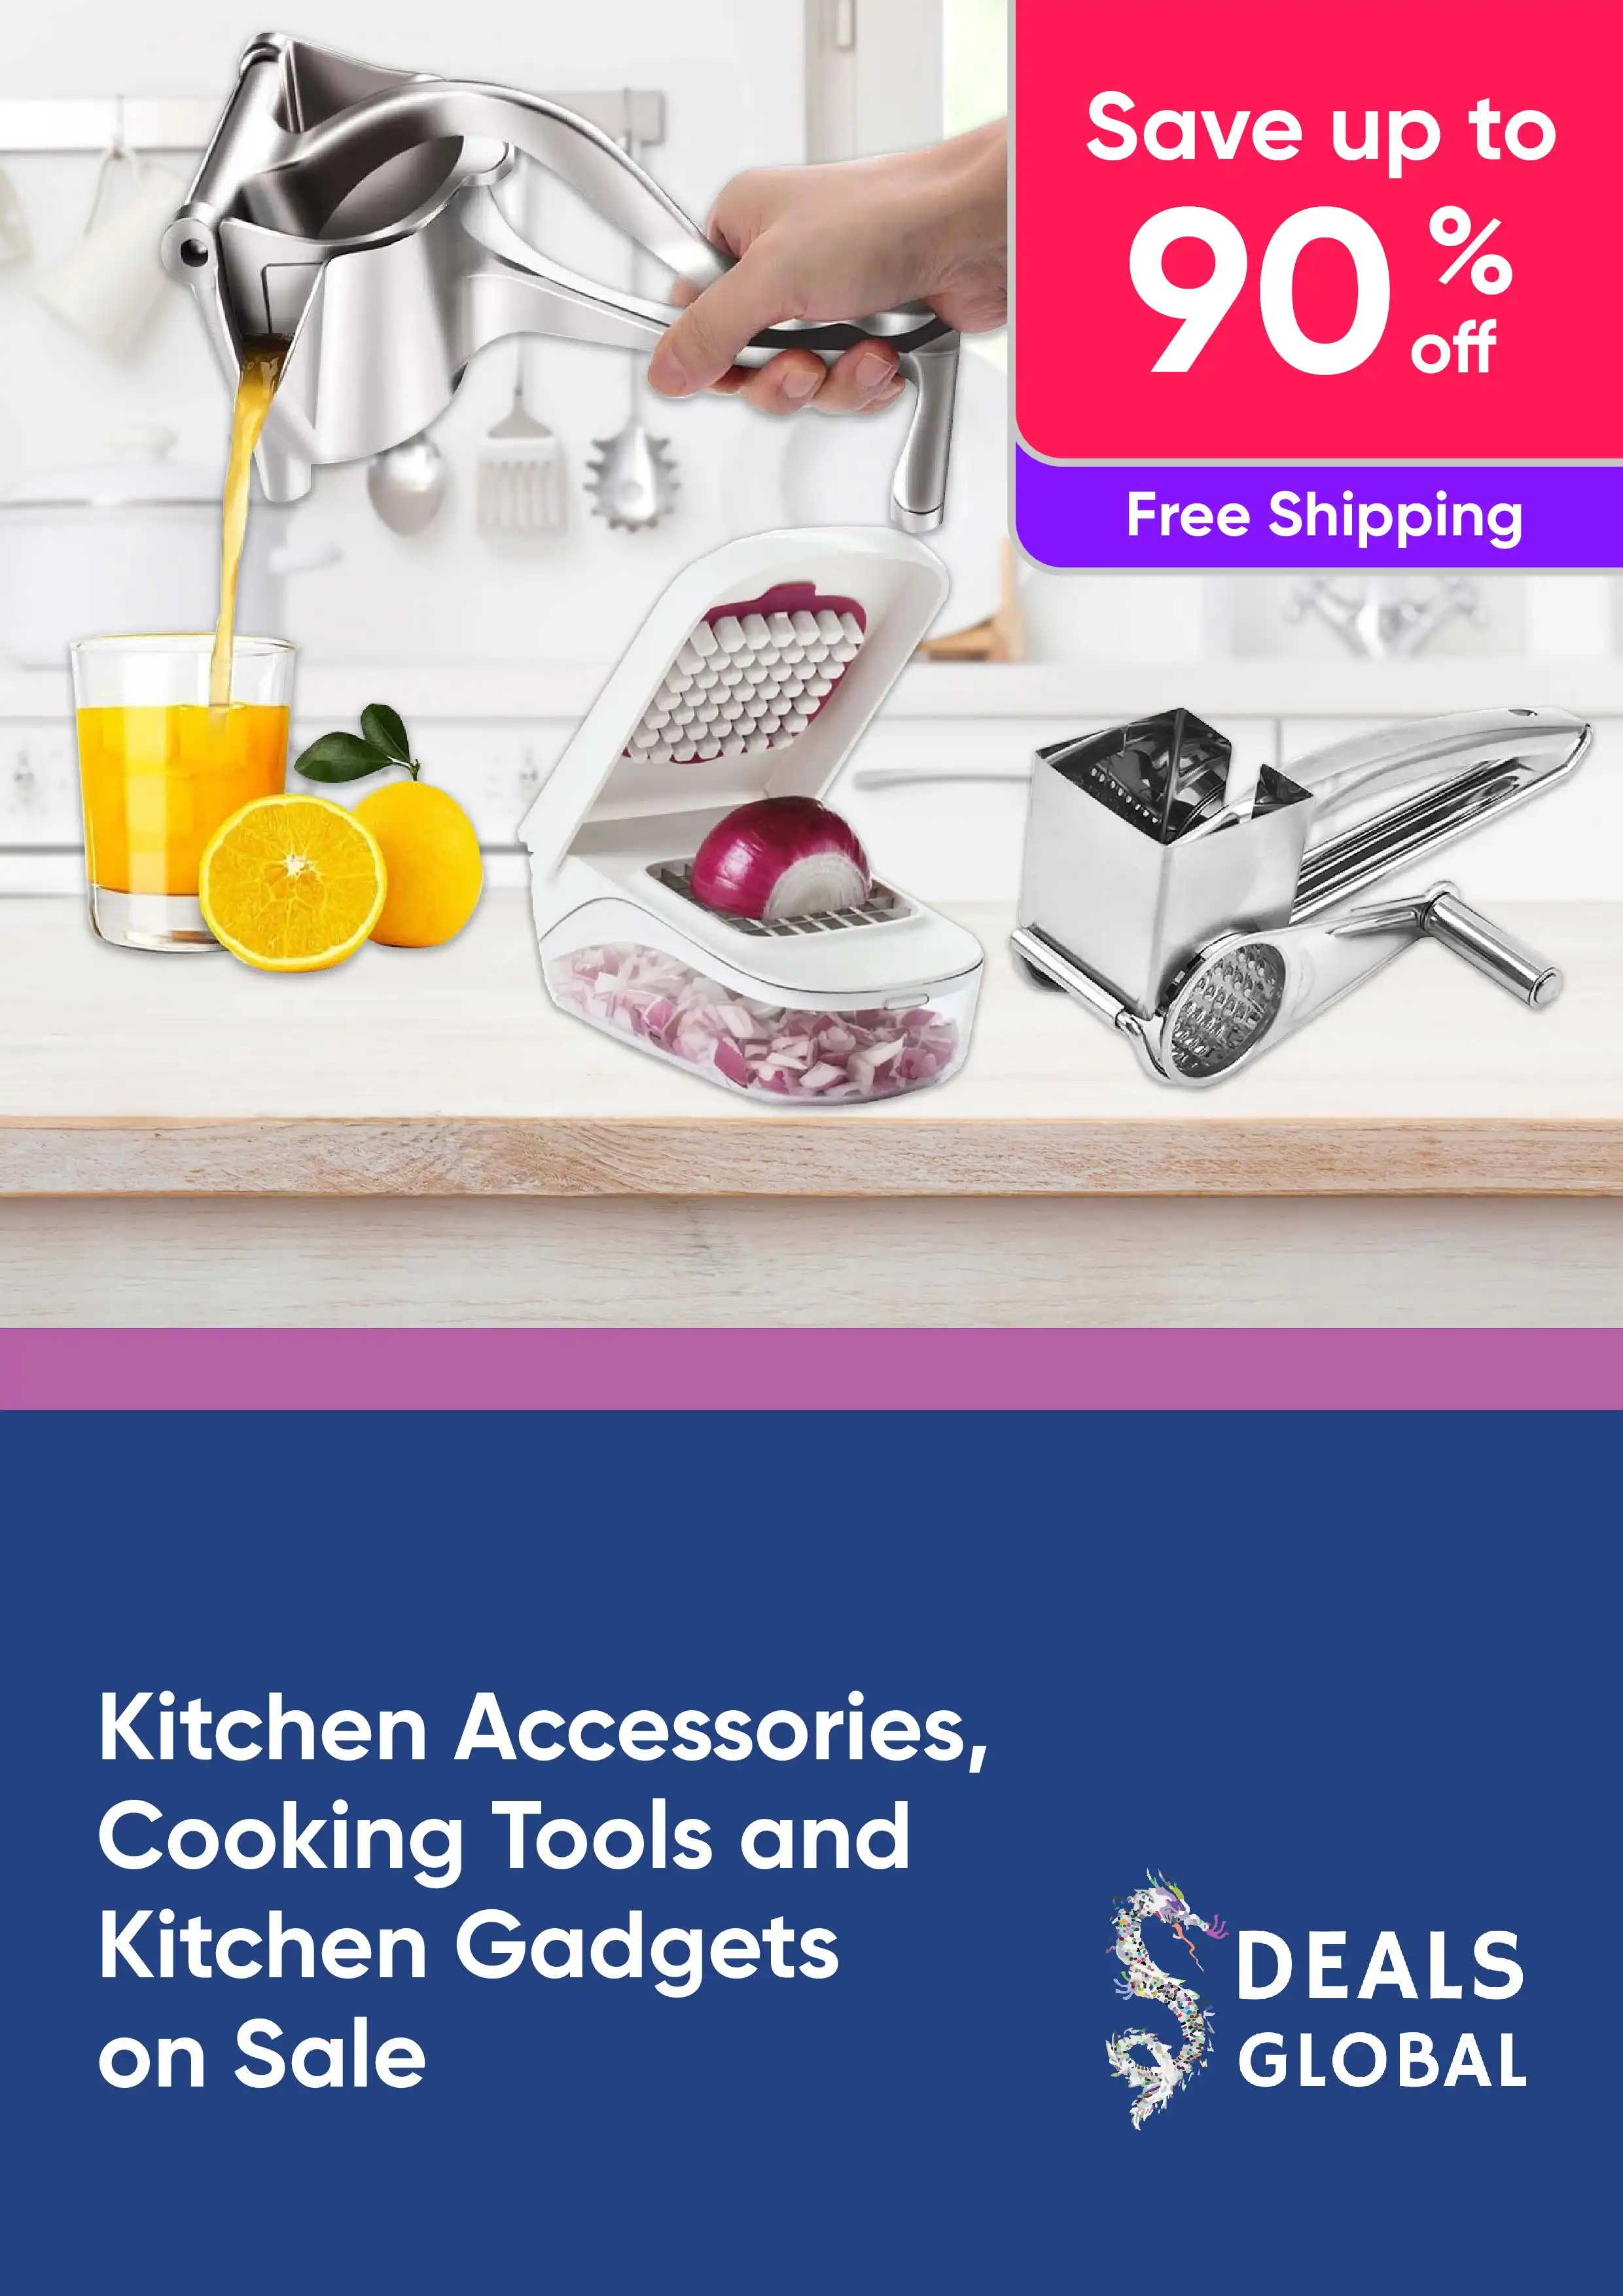 Kitchen Accessories, Cooking Tools and Kitchen Gadgets on Sale - Save up to 90% Off